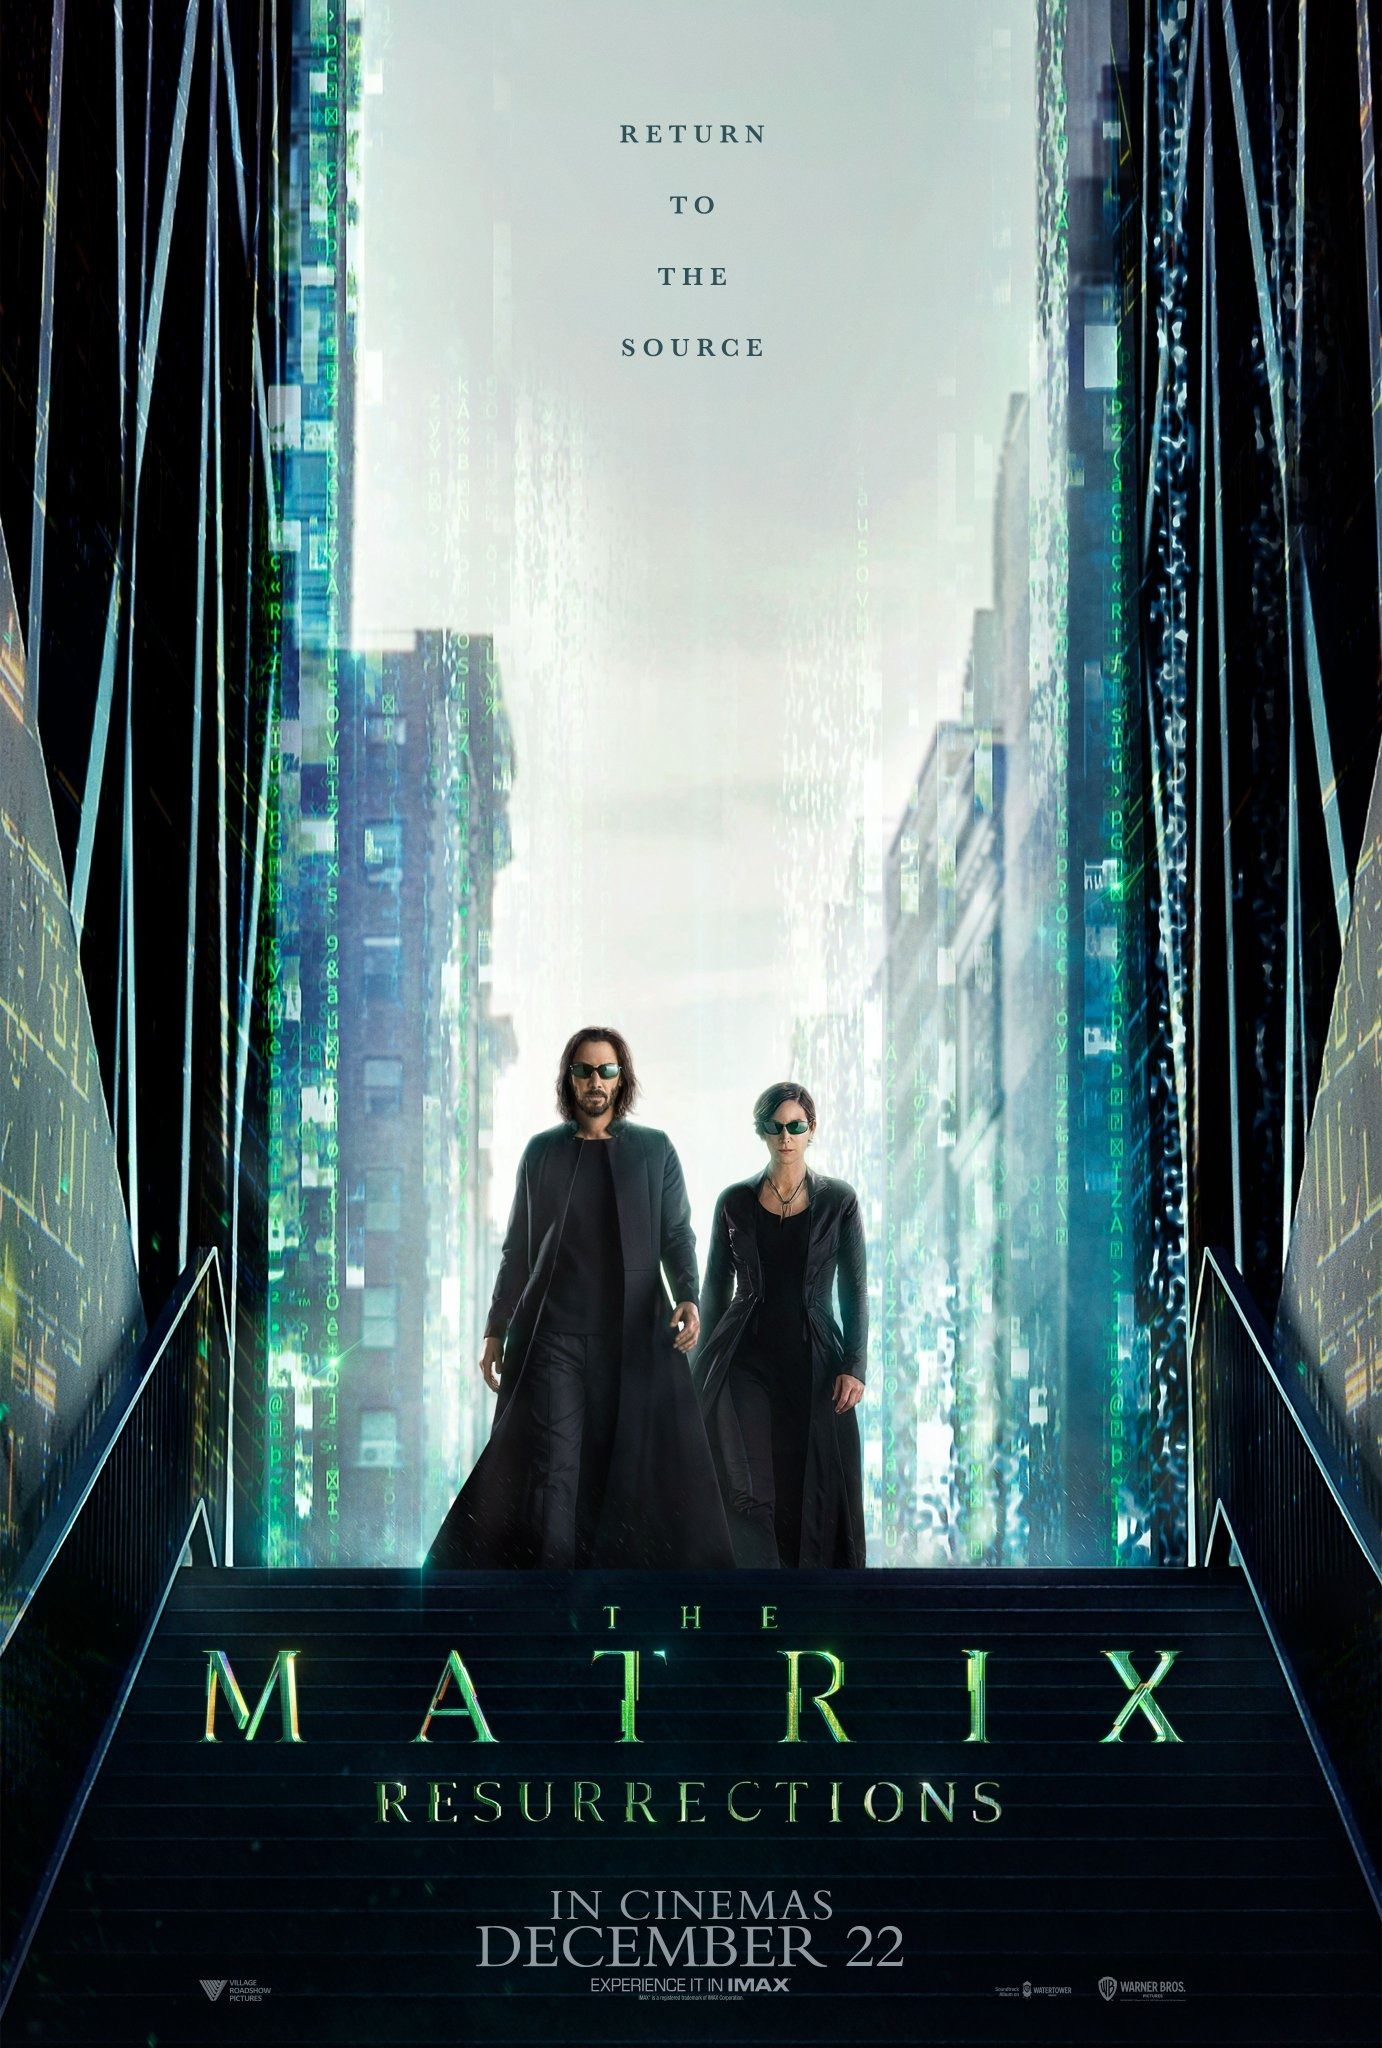 Neo And Trinity Return To The Source In New The Matrix Resurrections Poster